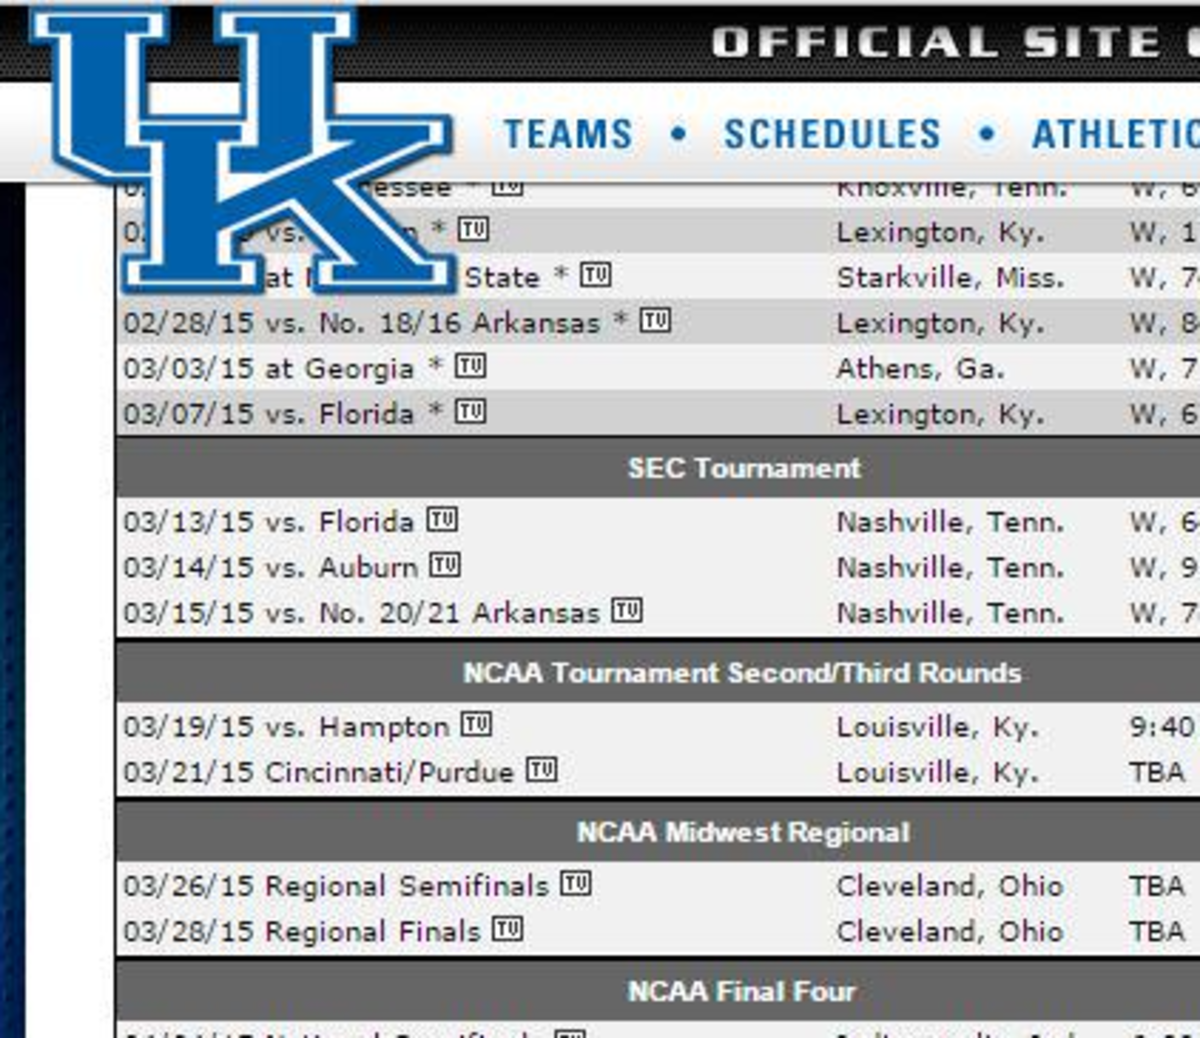 Kentucky adds Final Four to official schedule.